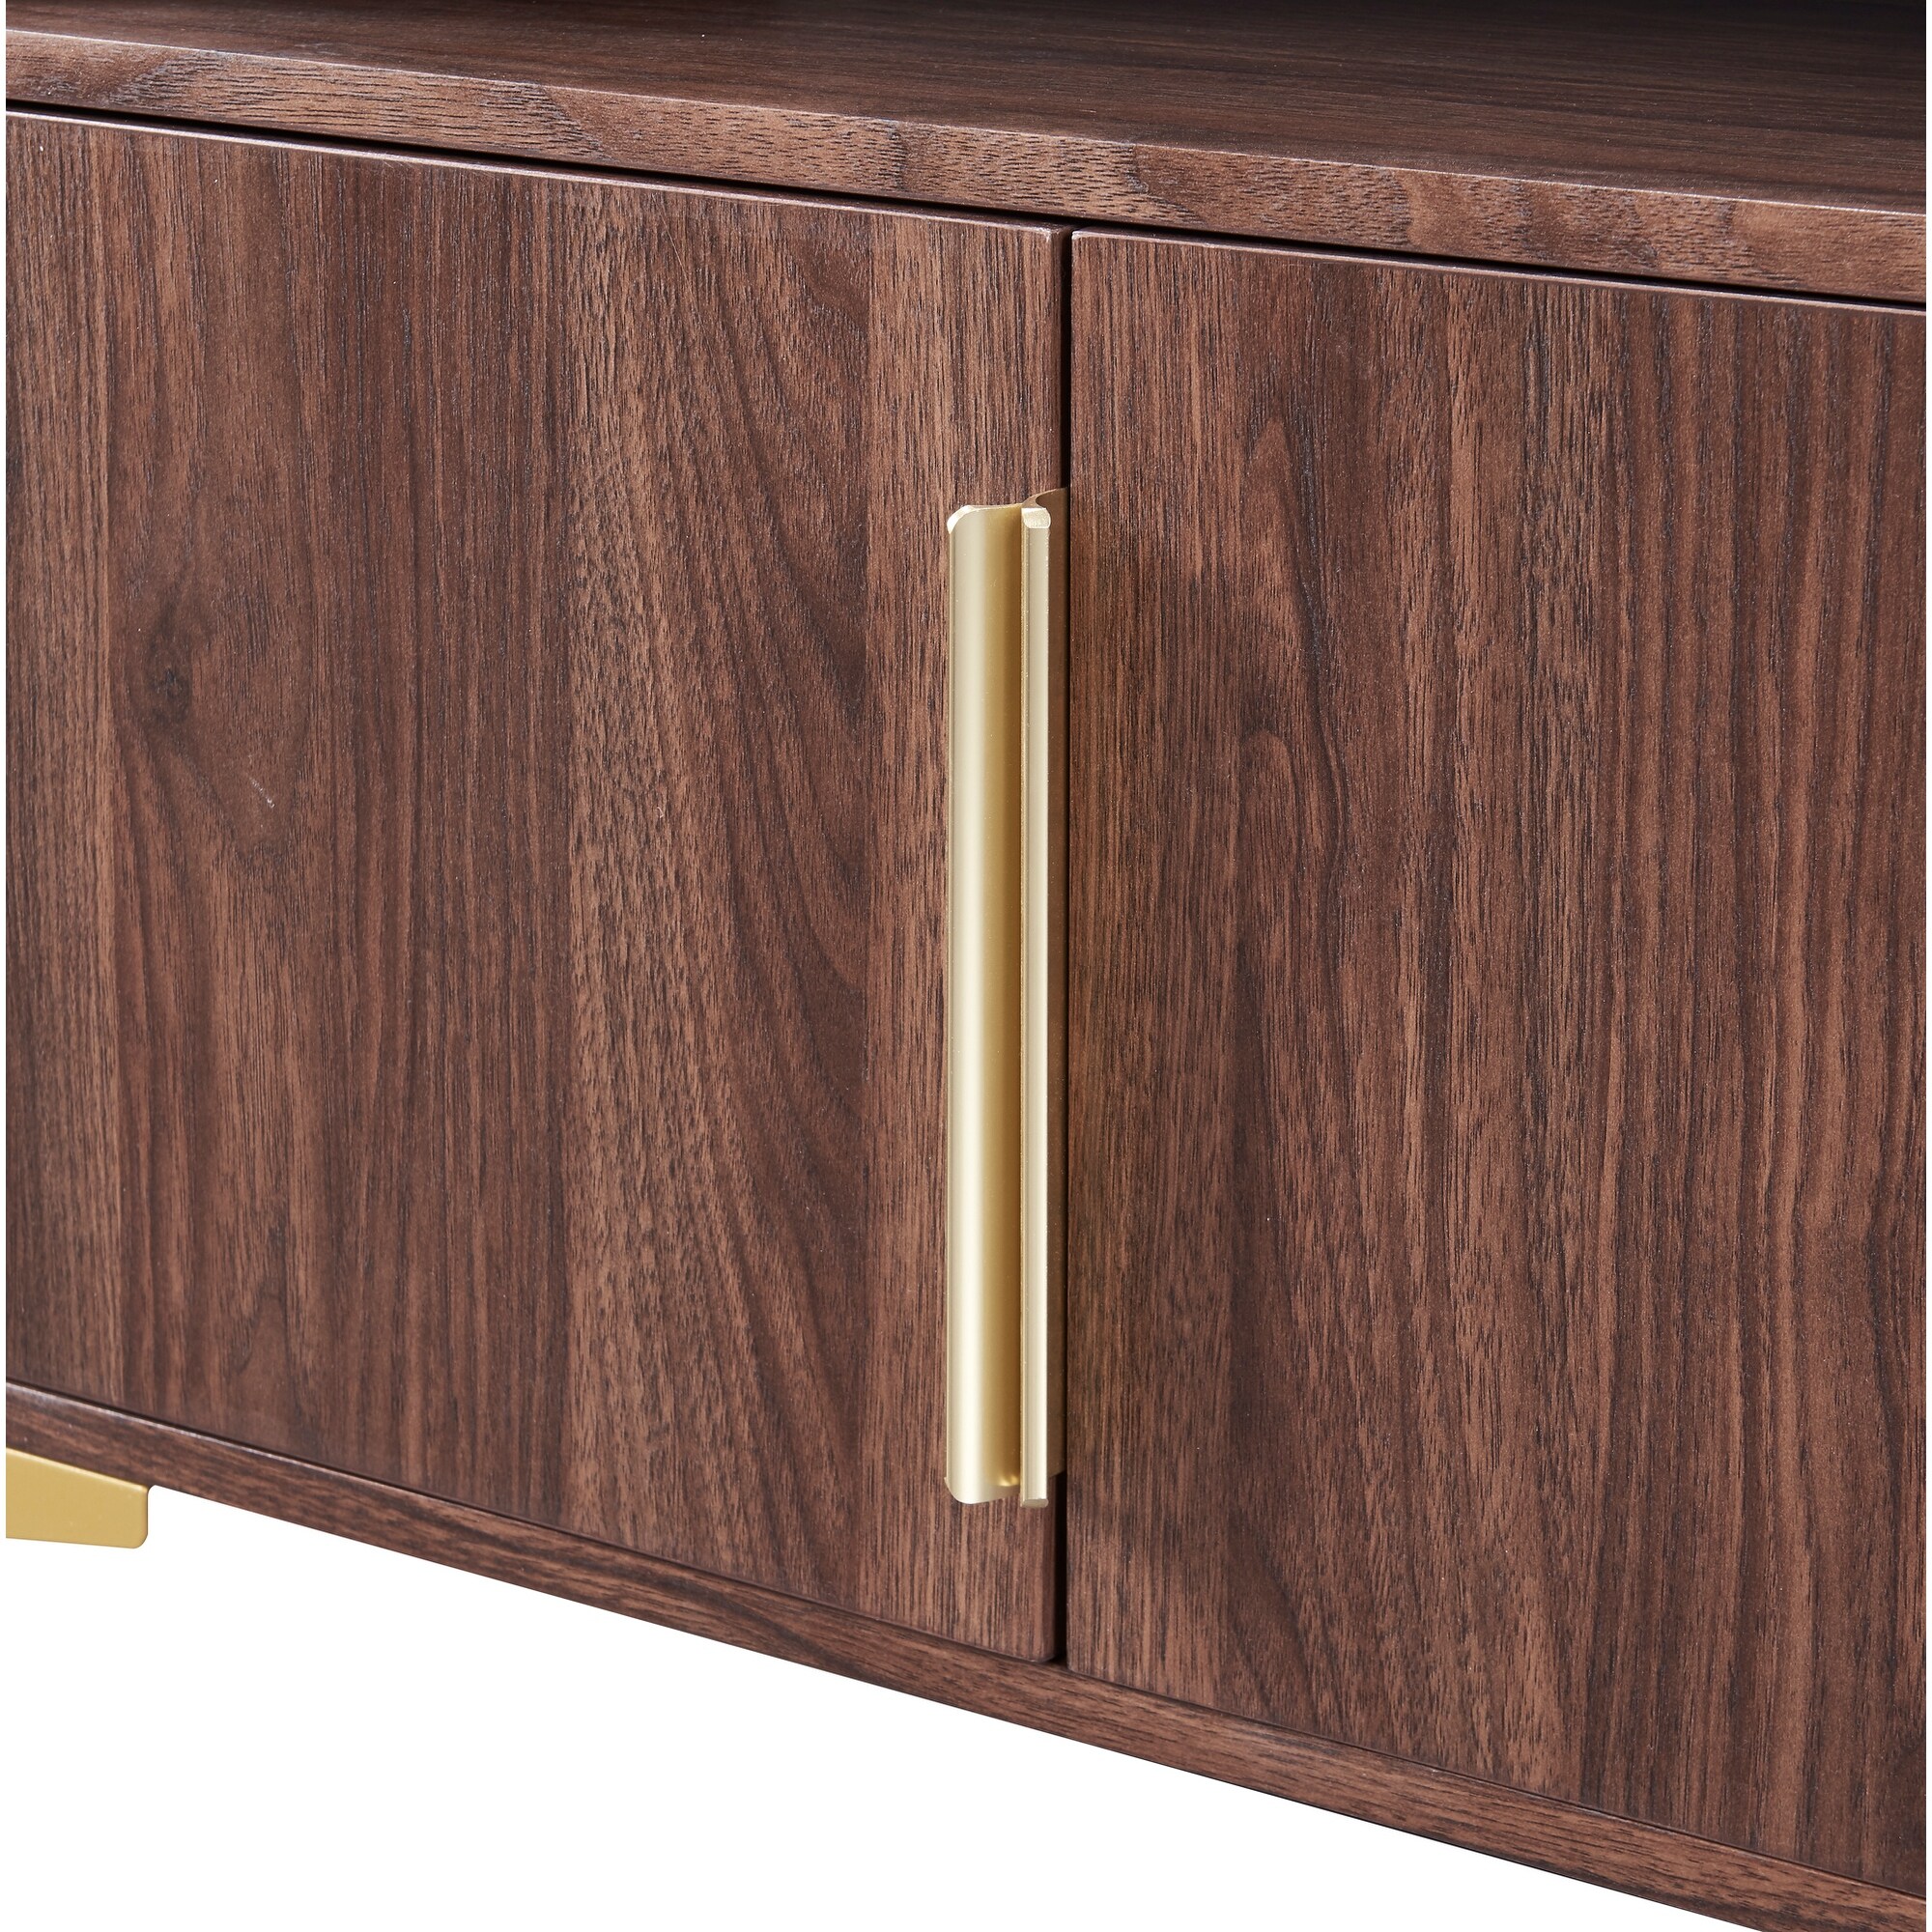 Modern Sideboard Sufficient Open Storage Space Cabinets with Gold Metal Legs and Handles & Magnetic Suction Doors Design